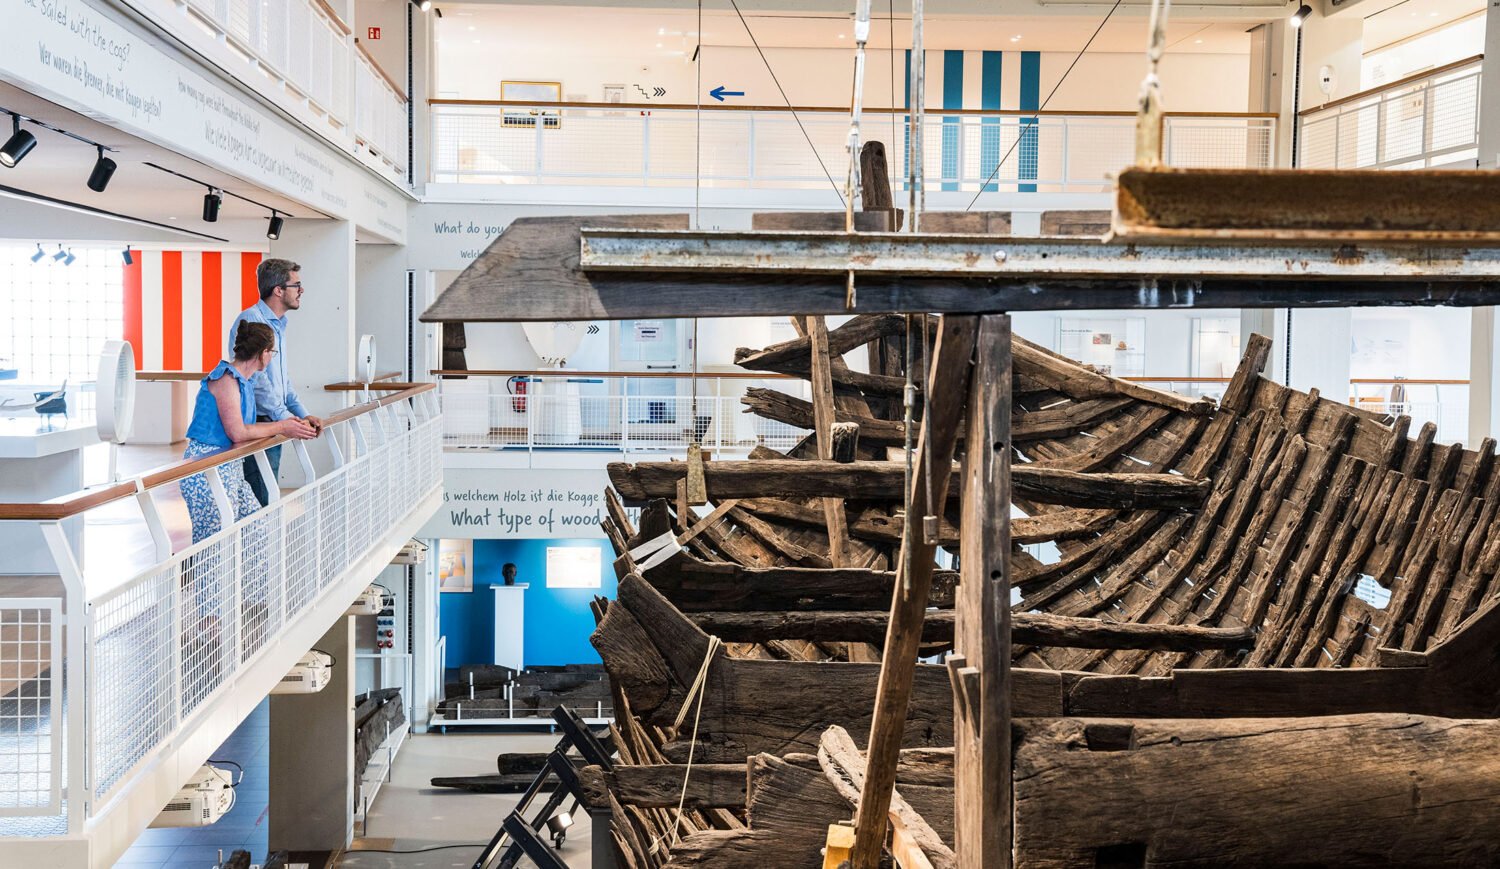 The "Bremer Kogge" is the world's best preserved trading ship of the Middle Ages